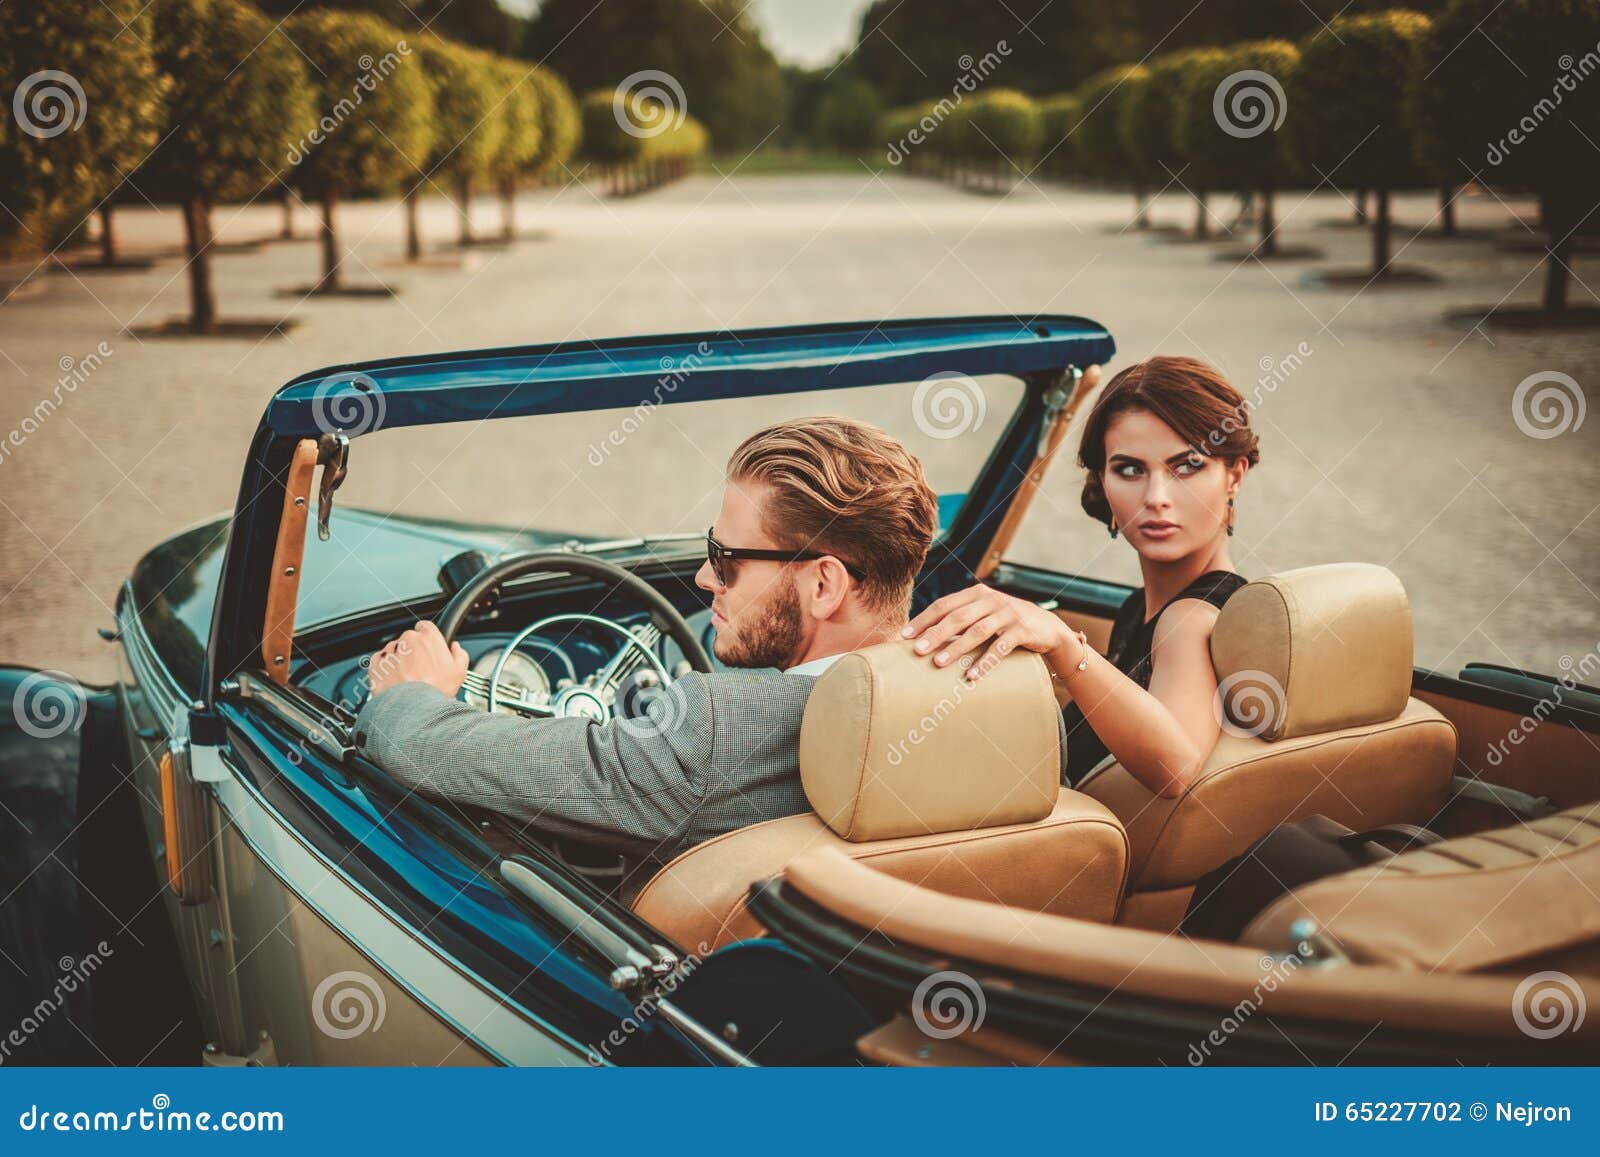 wealthy couple in classic convertible